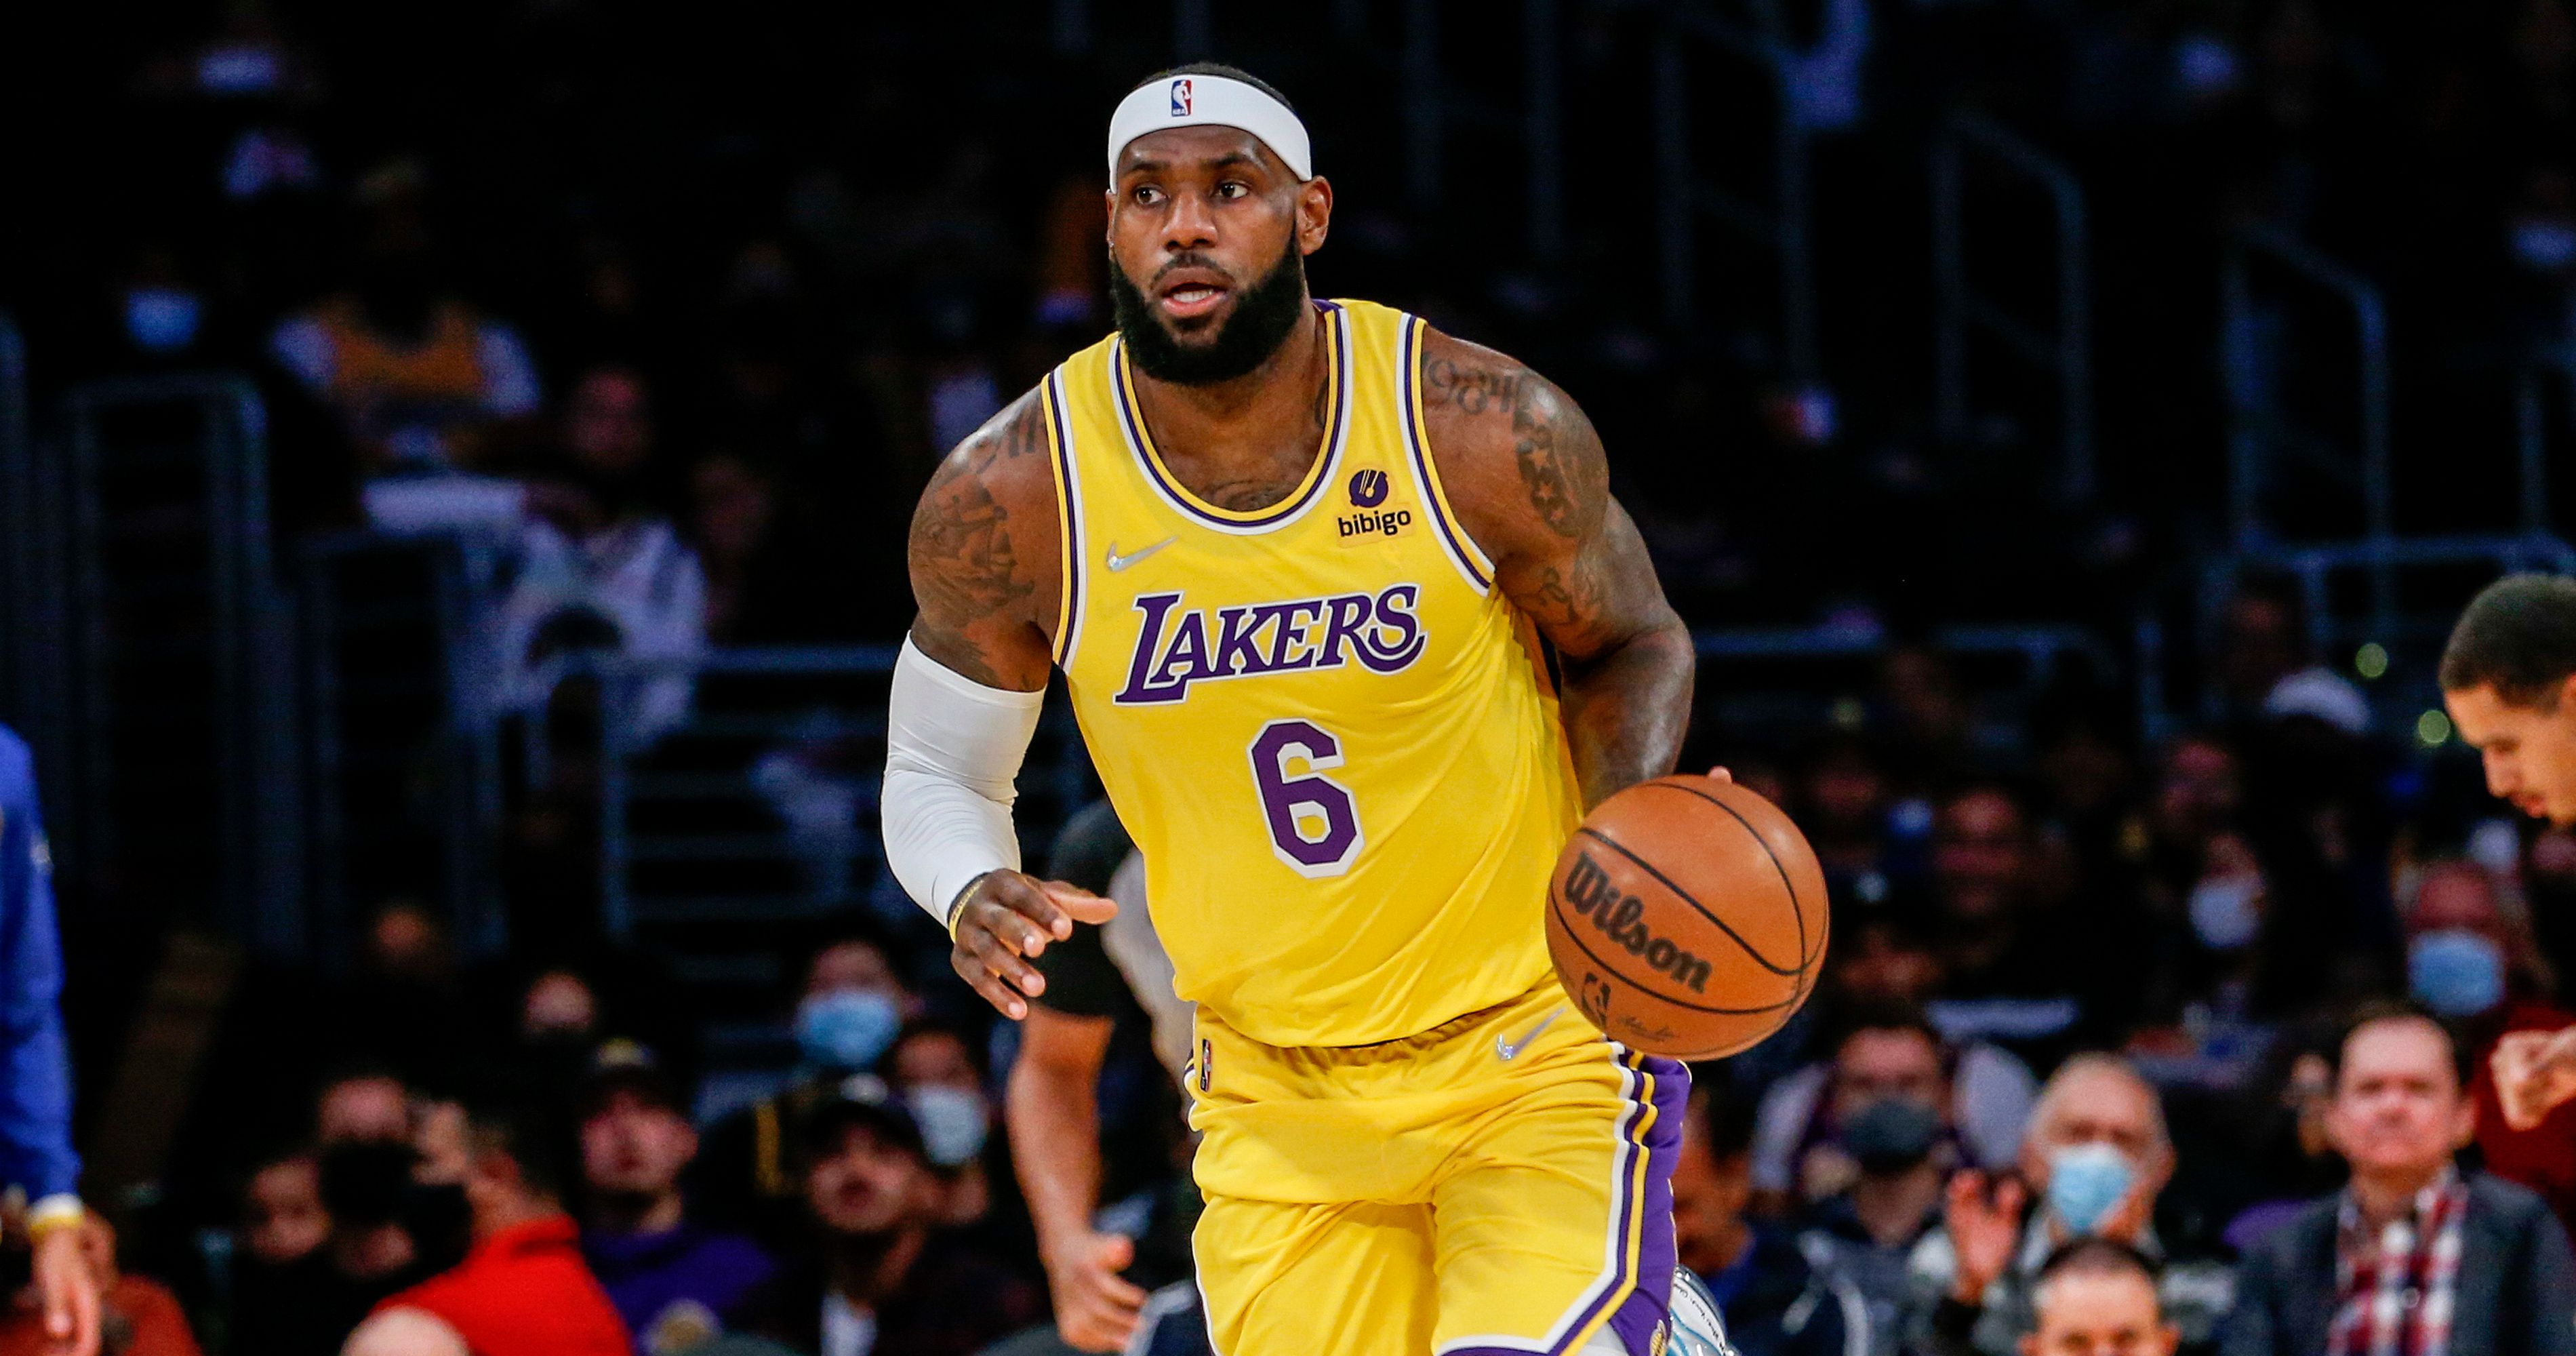 NBA: LeBron James ready to push Lakers for "most important 23 games of career"